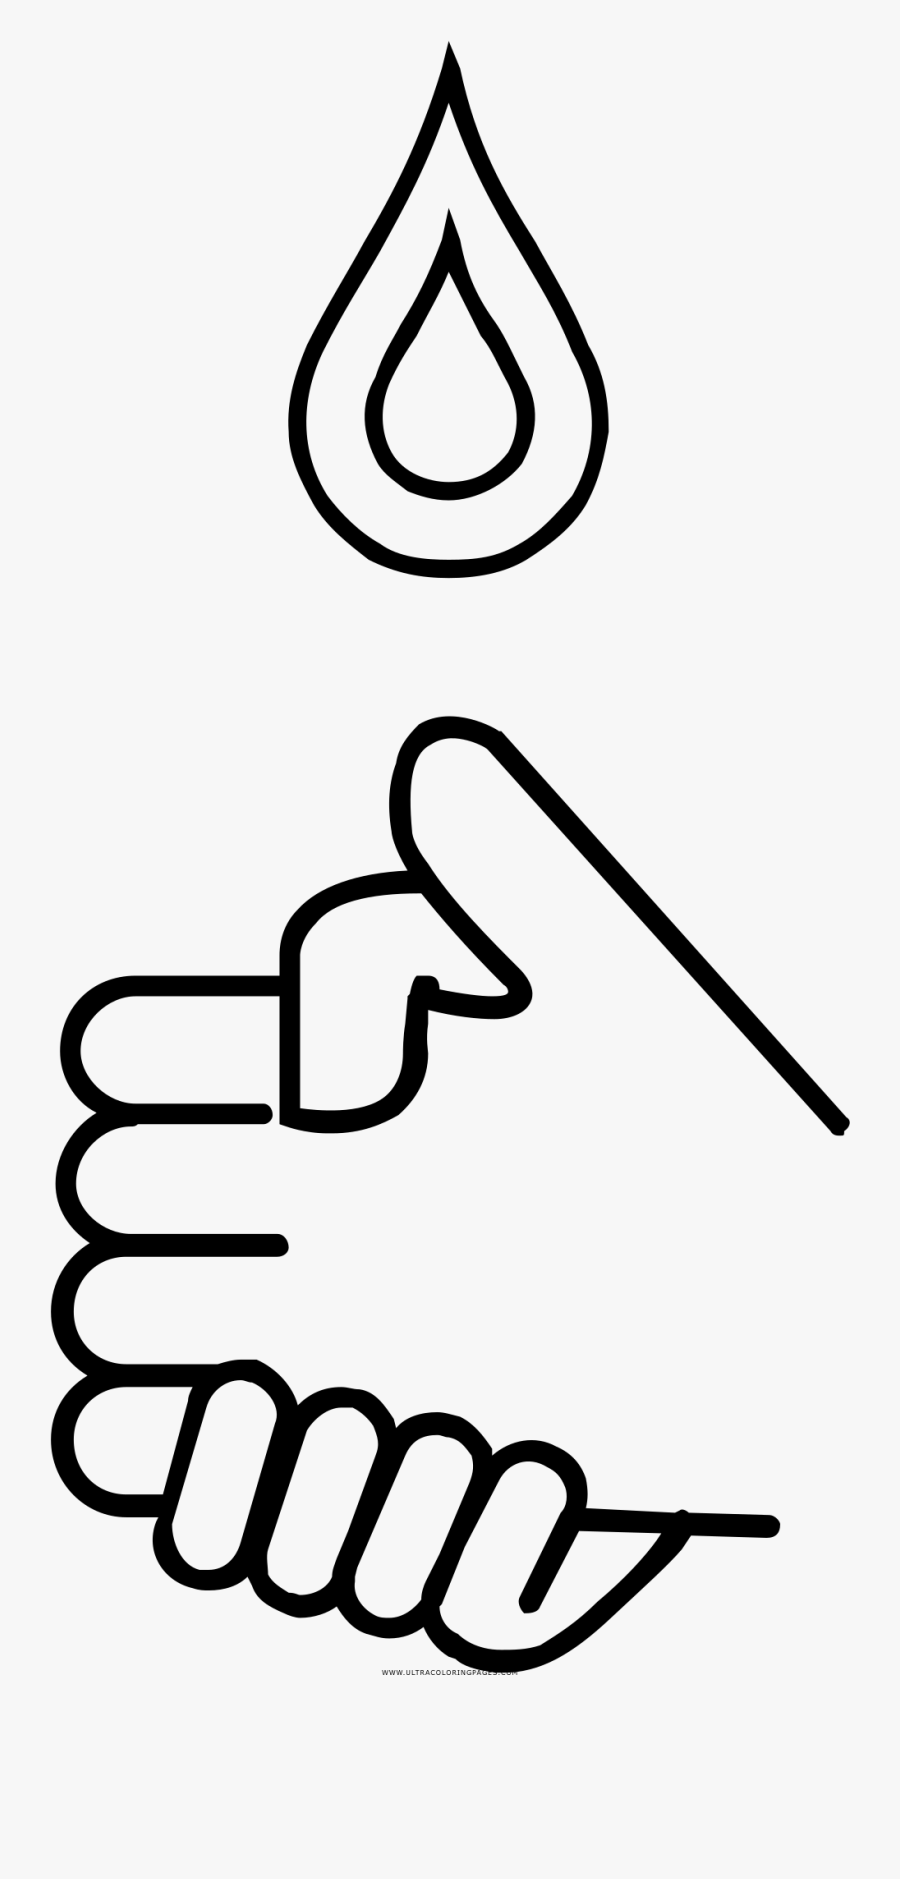 Wash Hands Coloring Page - Washing Hand * Png, Transparent Clipart